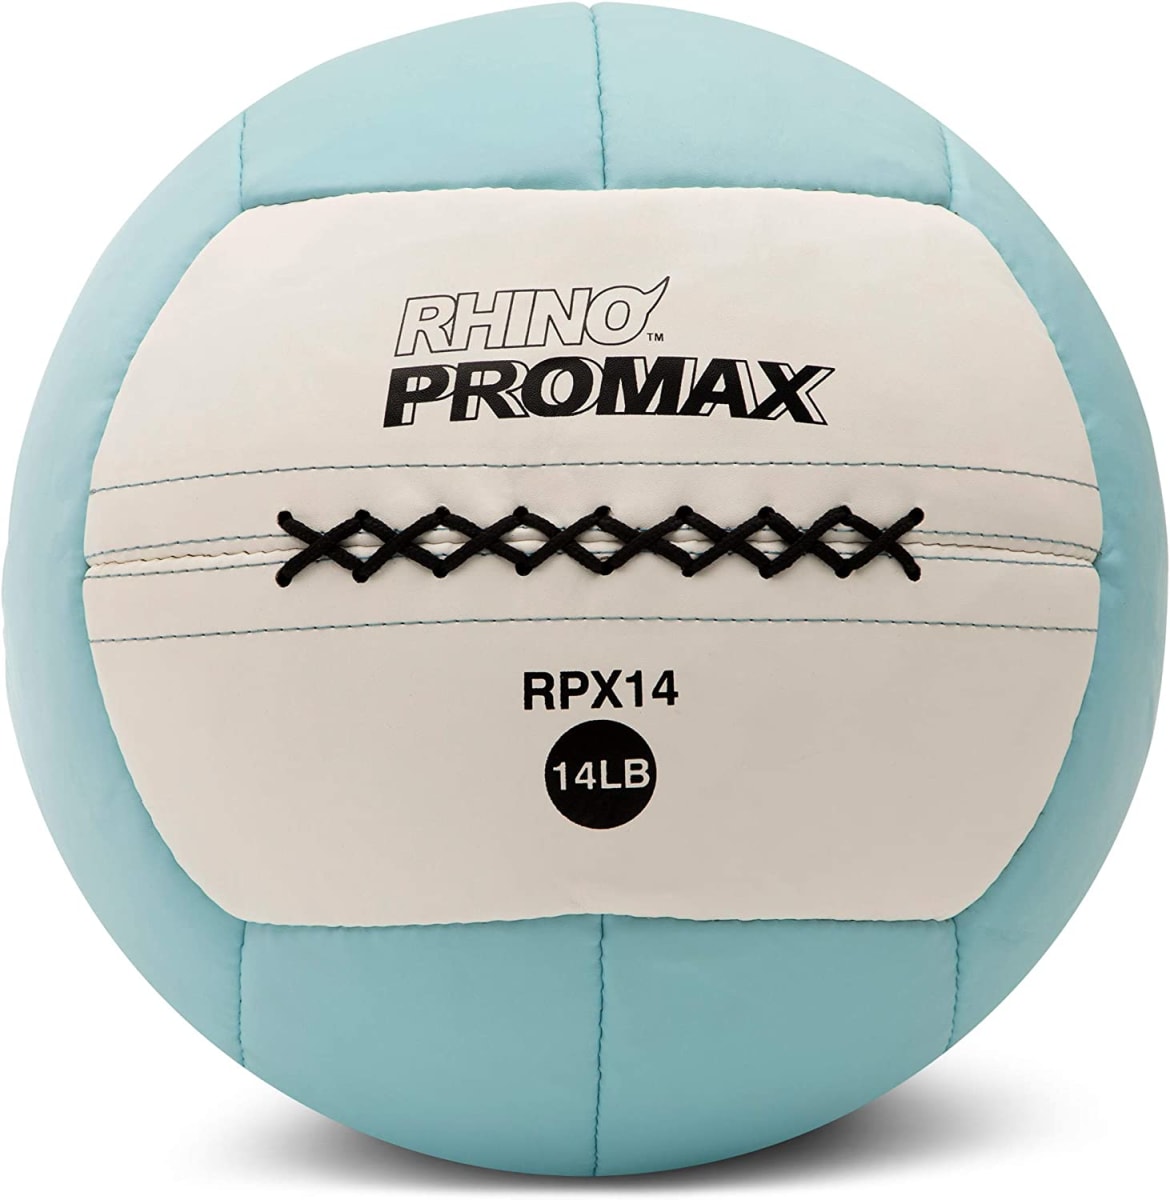 Rhino Promax Slam Balls, Soft Shell with Non-Slip Grip - Medicine Wall Ball for Slamming, Bouncing, Throwing - Exercise Ball Set for Weightlifting